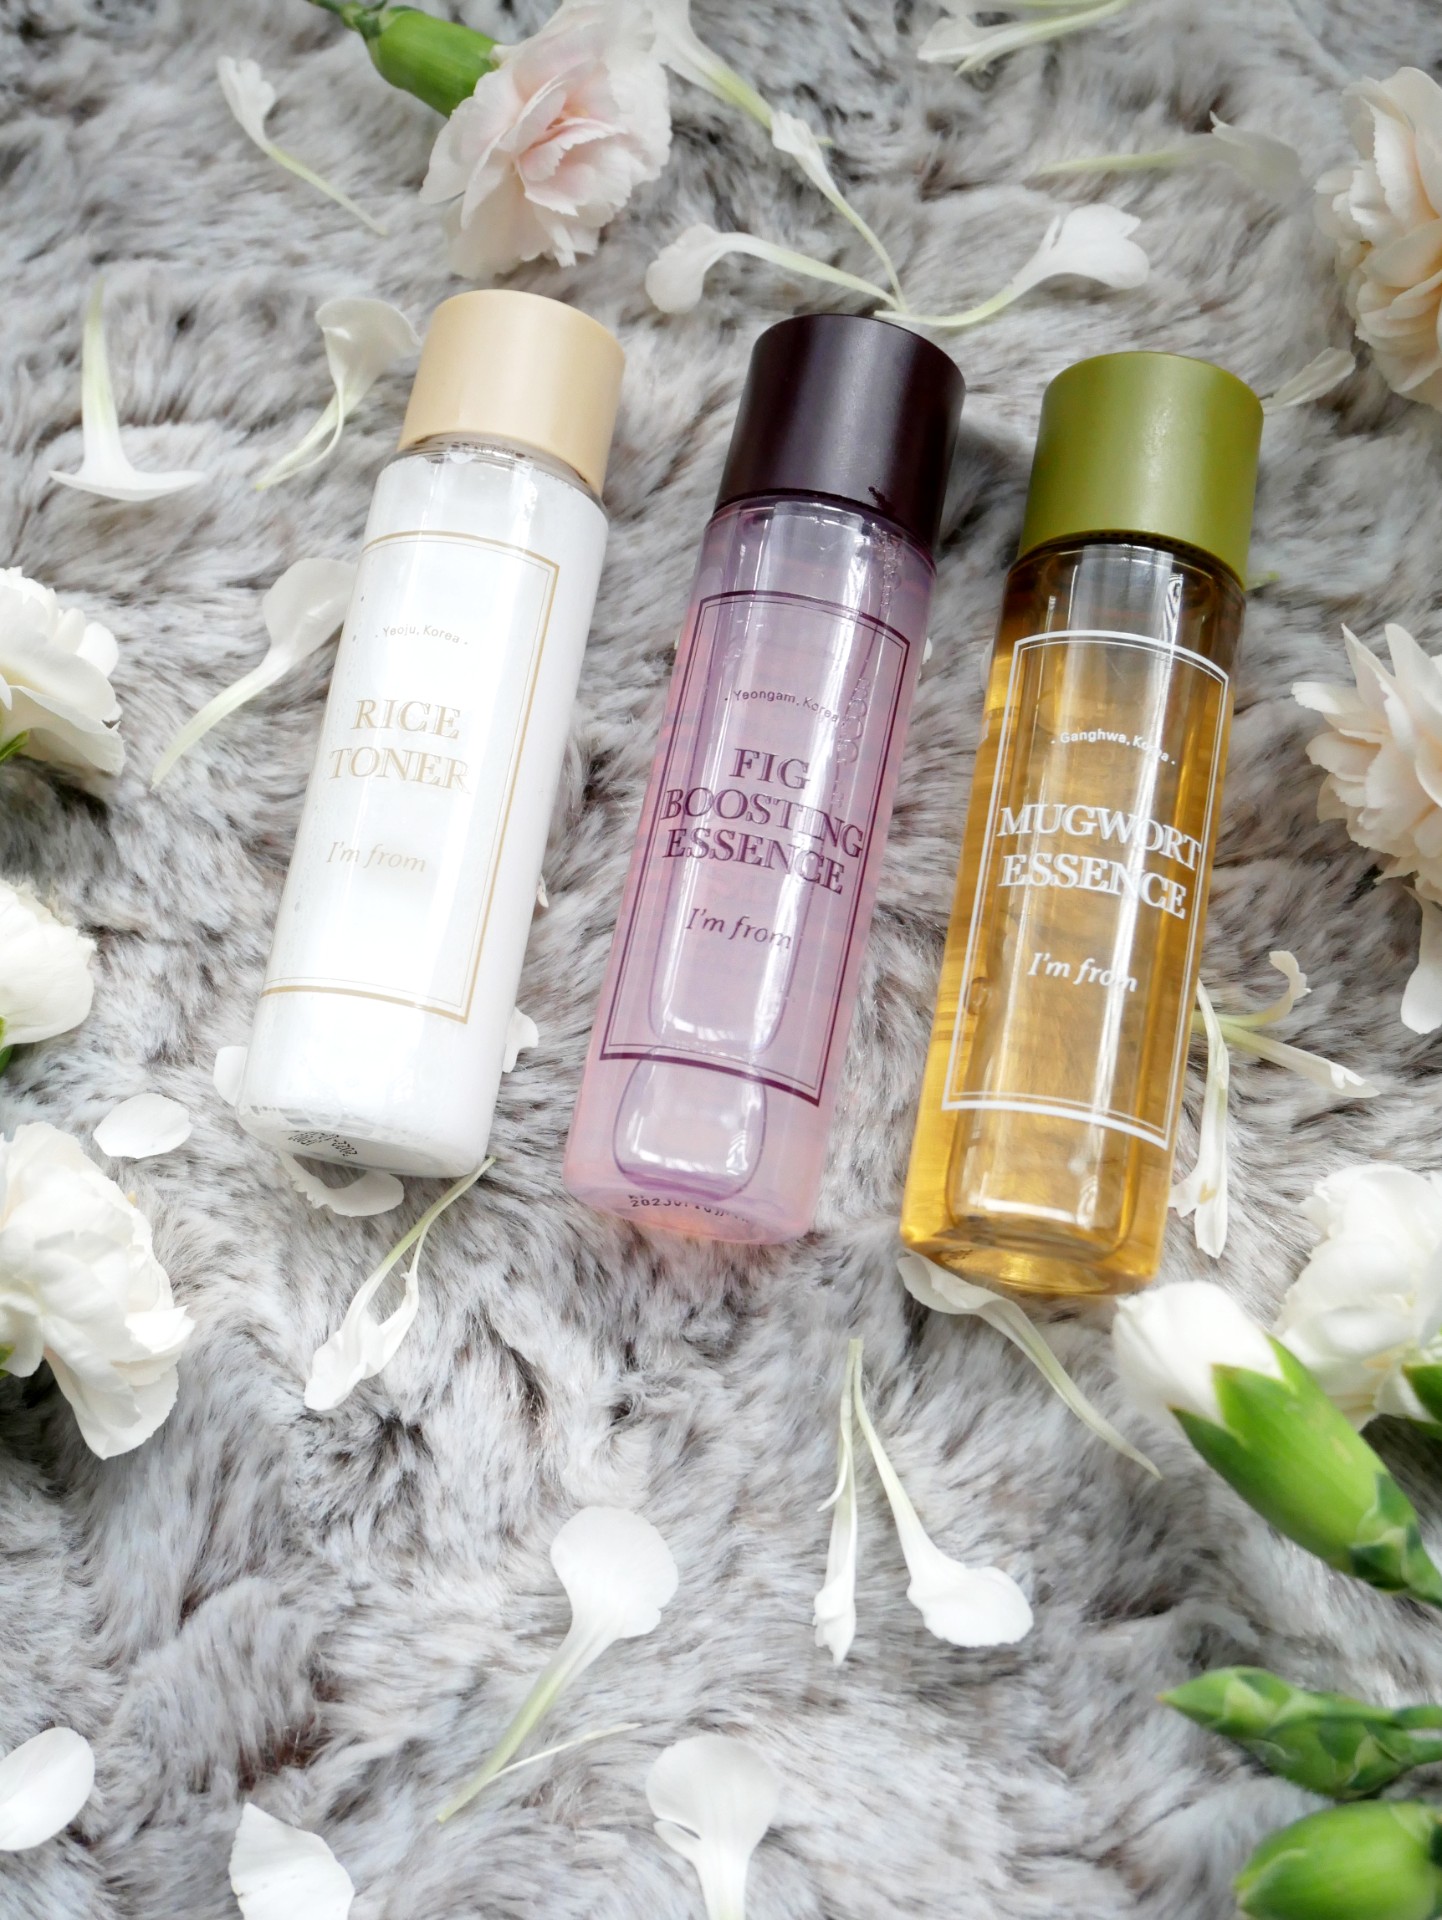 I'm From Essences and Toner Review - Class & Glitter